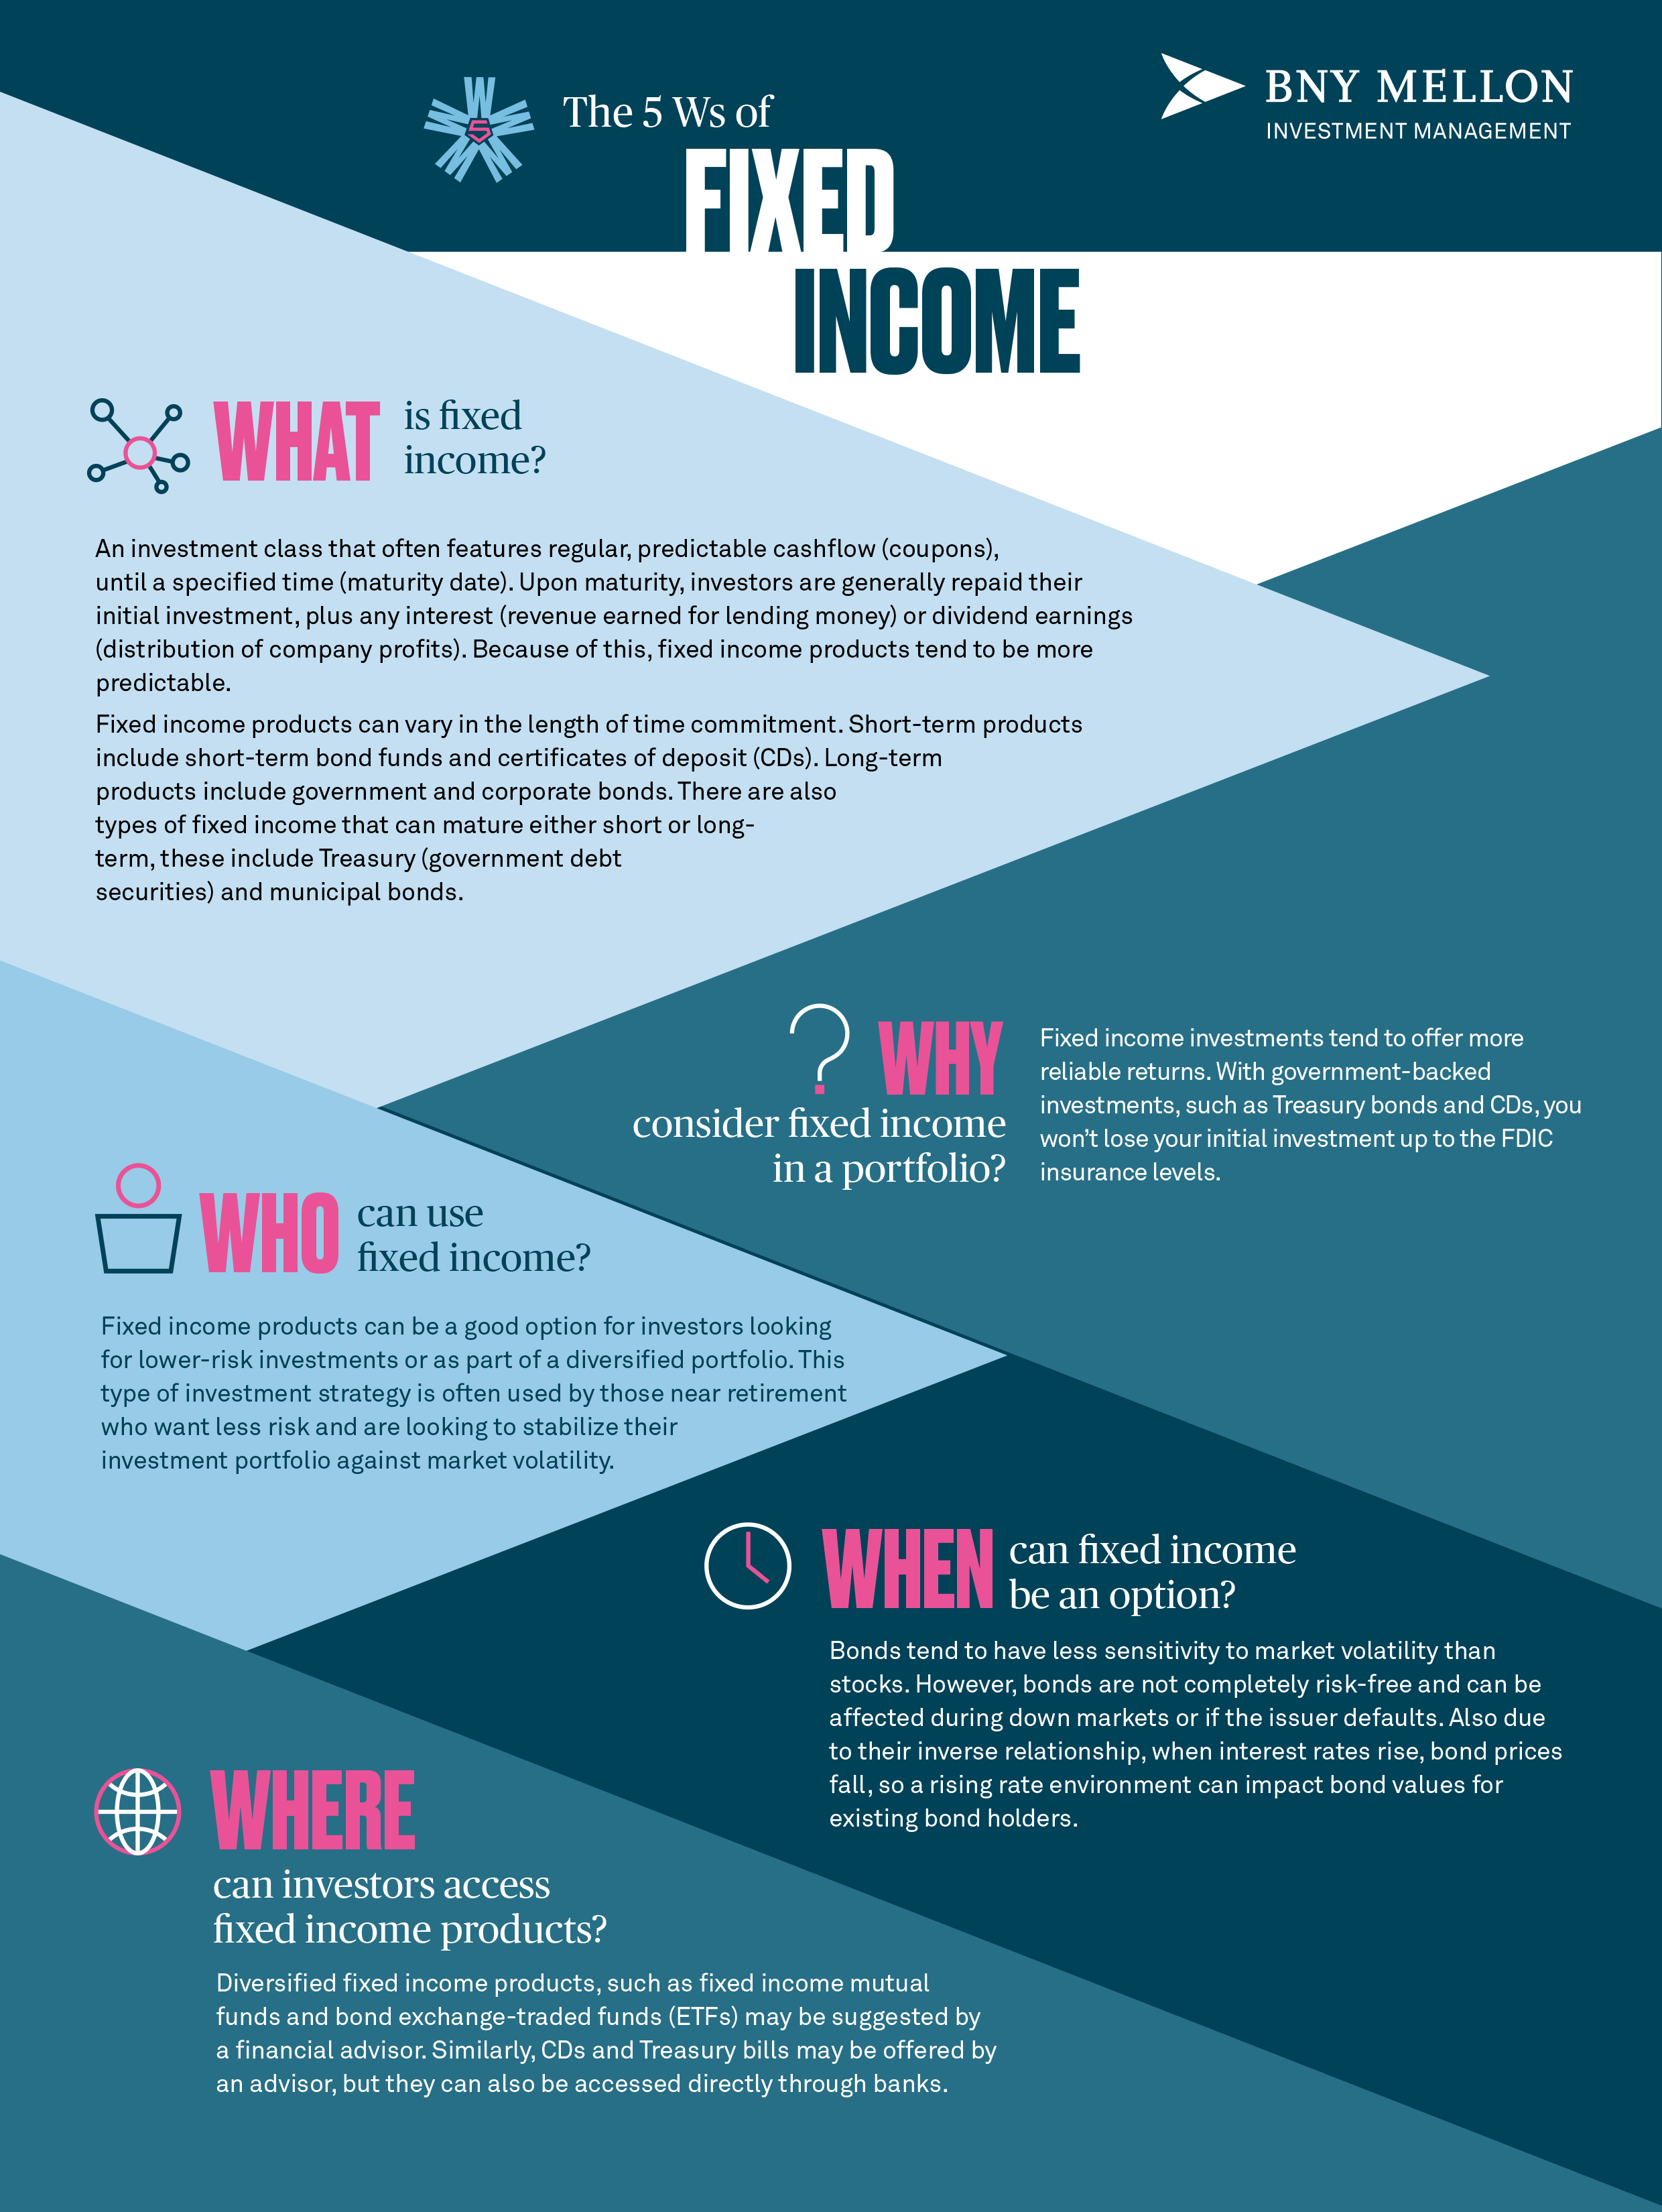 Fixed income infographic explaining the who, what, where and when of the investment class.